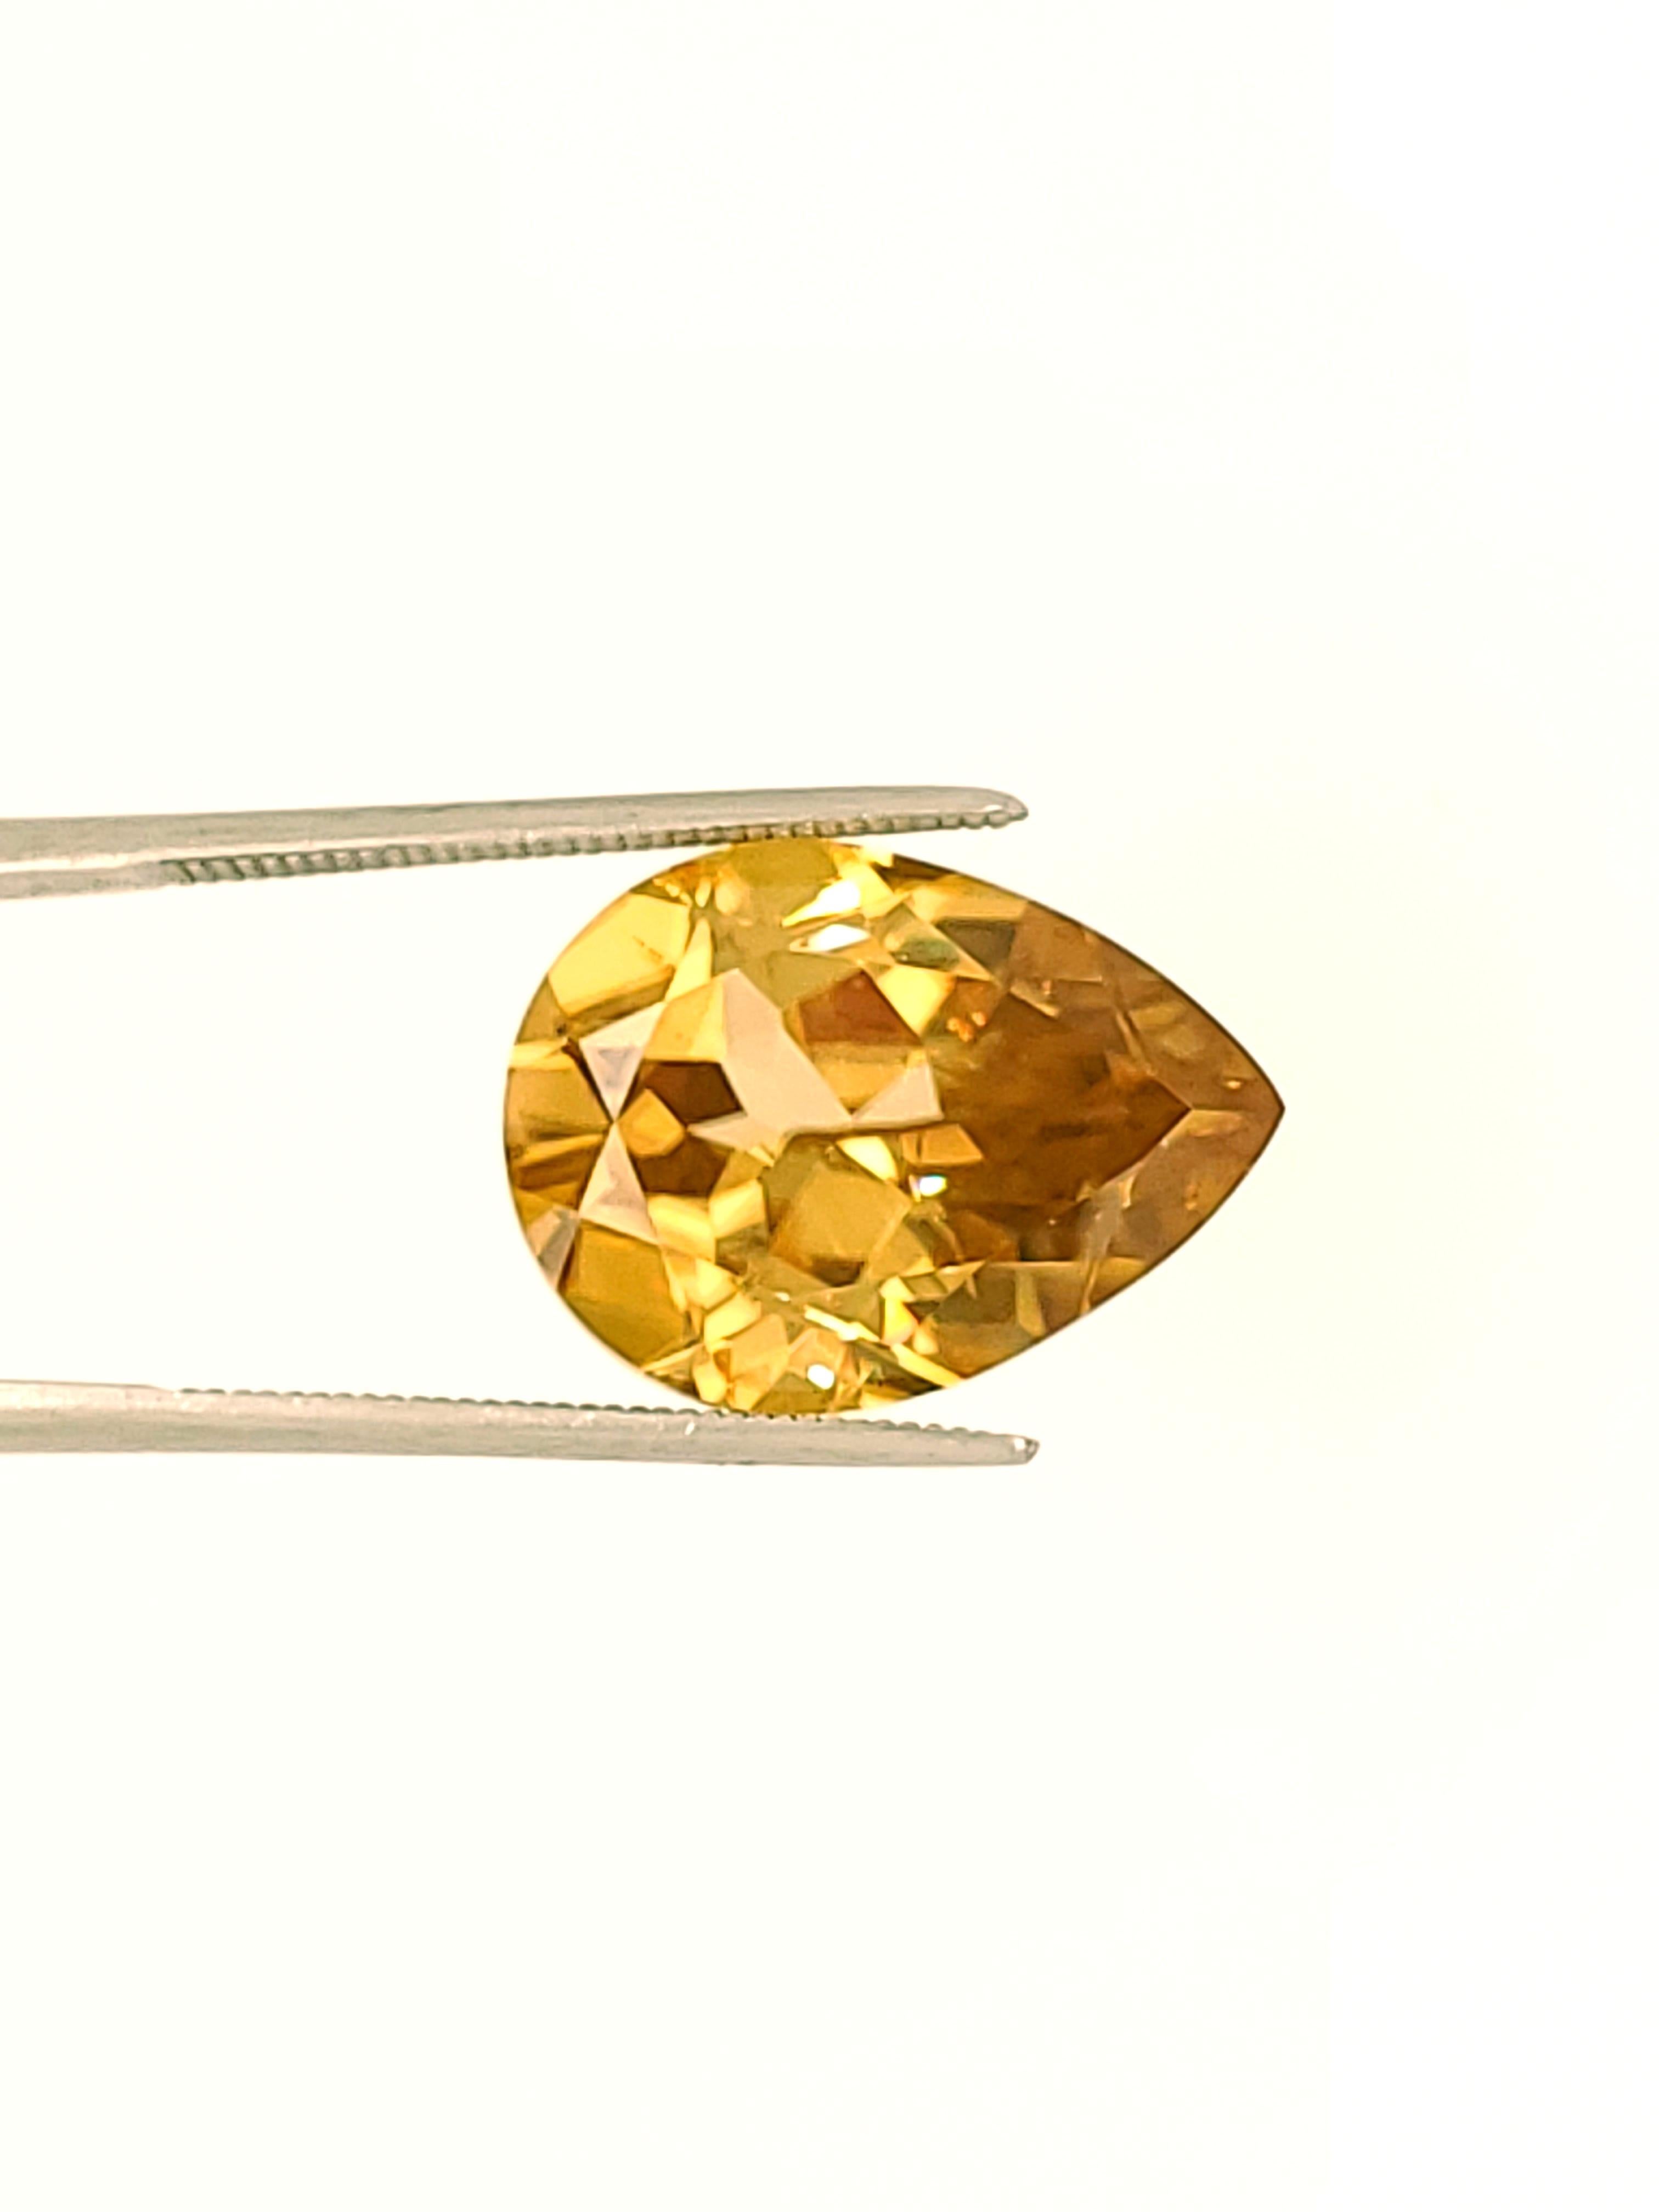 A nice very Bright Yellow Zircon with some gold flashes.  This beauty was faceted from our rough, in the United States, weighs in at 10.97 carats and measuring about 16x12mm. Prices for Zircon, especially larger gemstones, have been going up. 